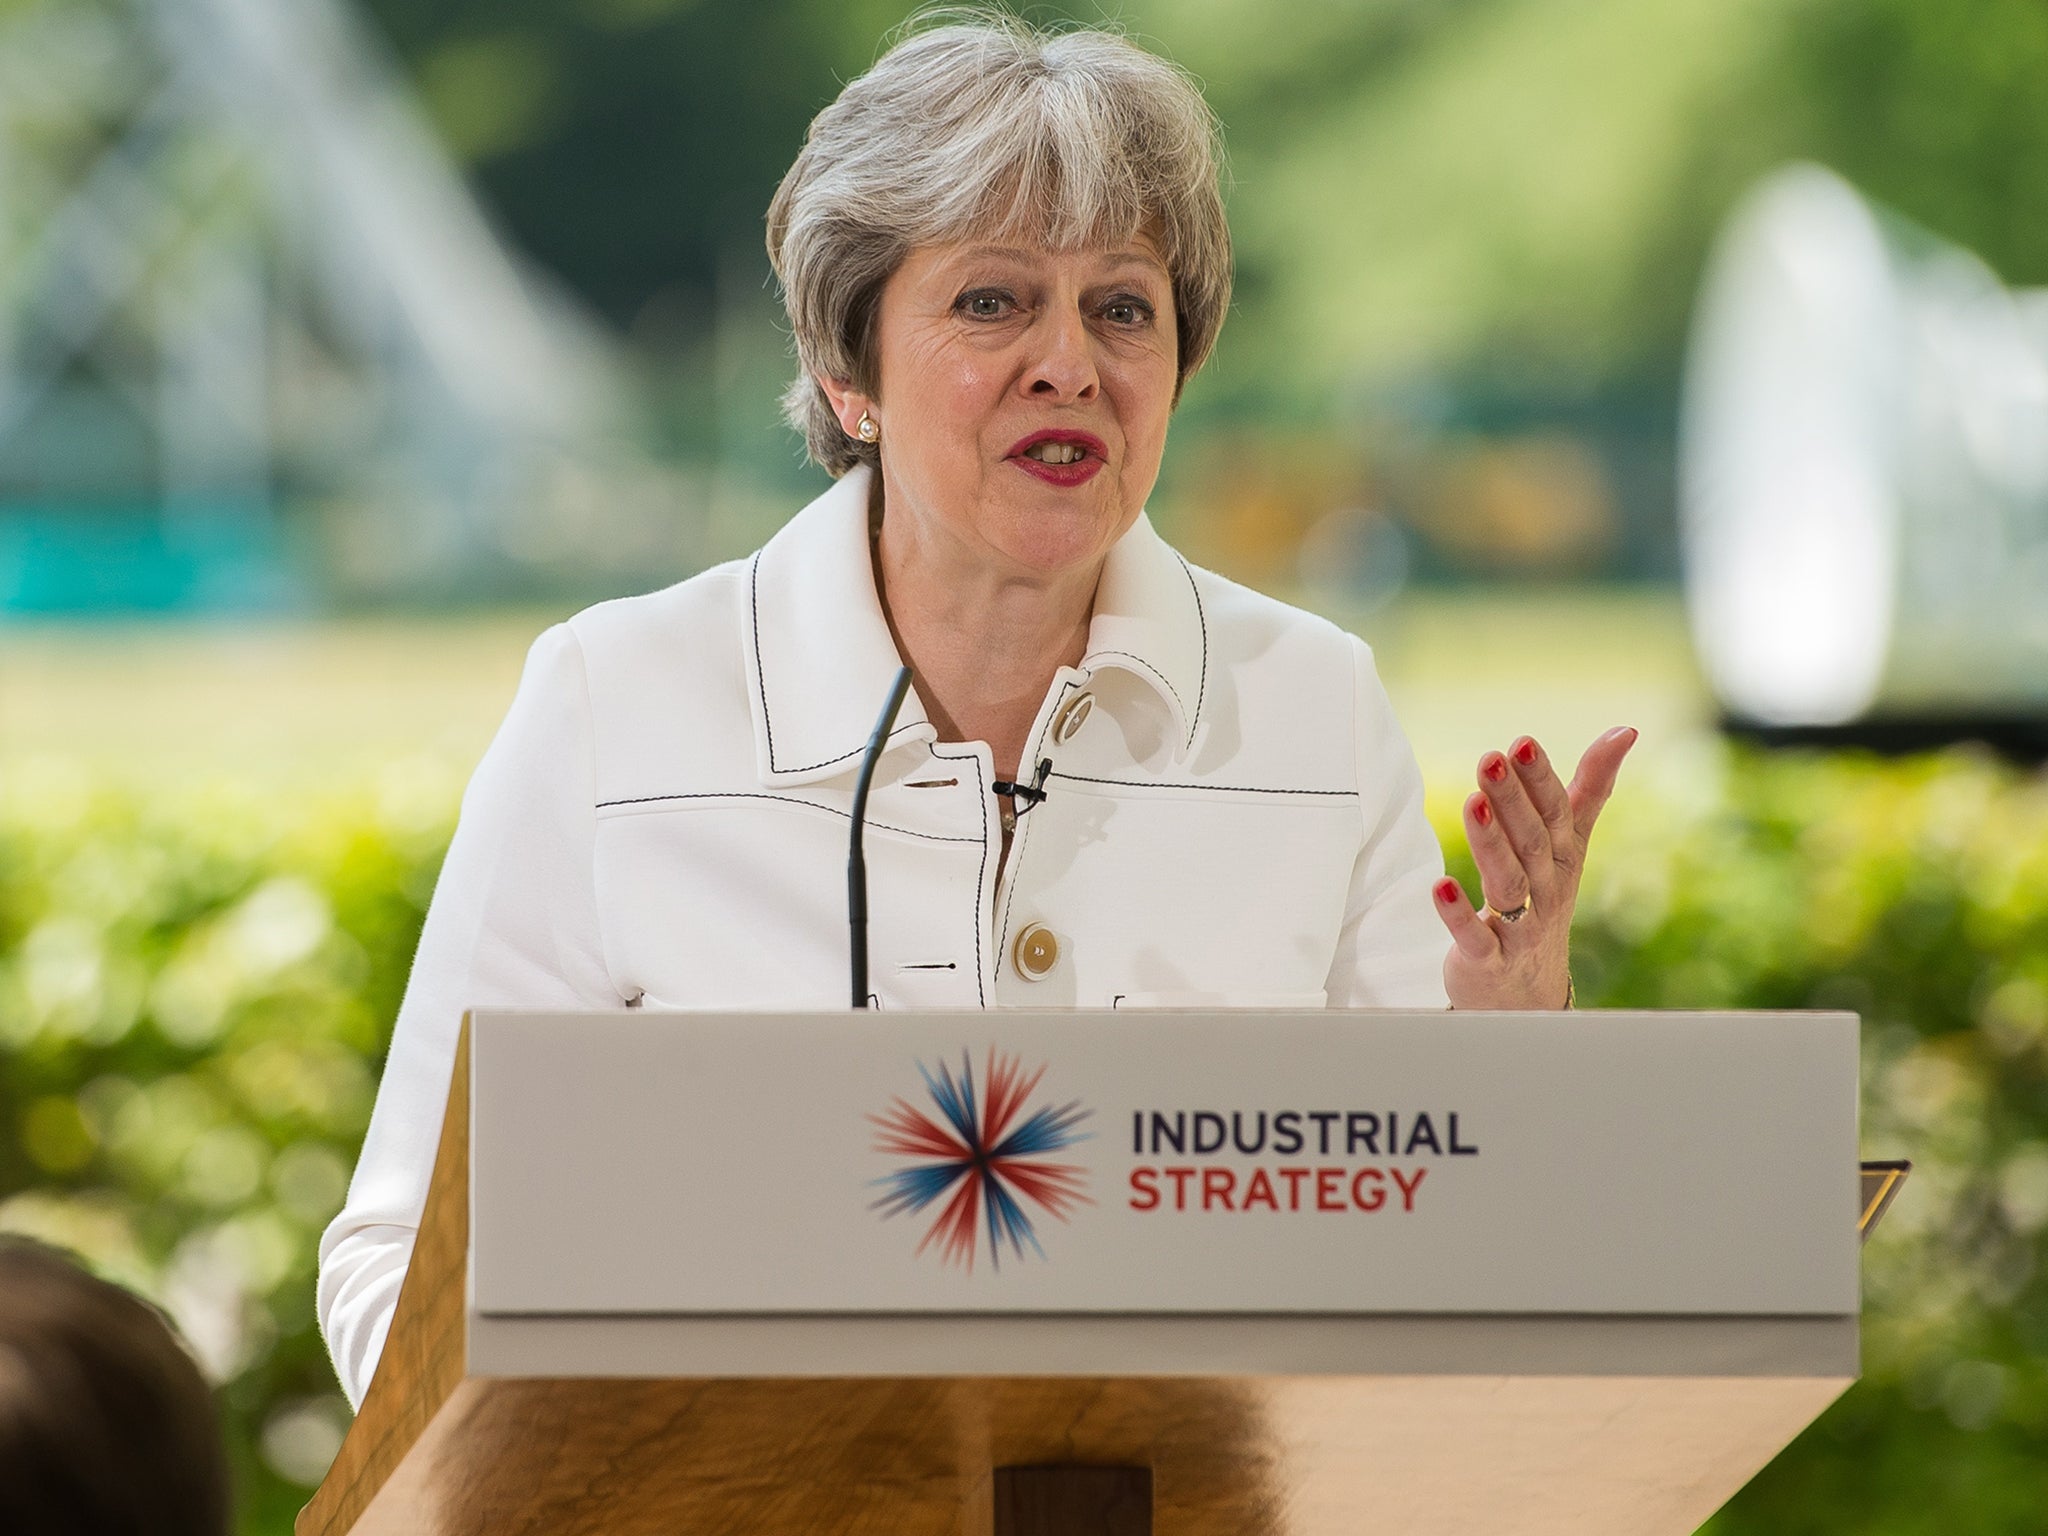 The British Chambers of Commerce have published an open letter to the Prime Minister urging her to focus on issues outside of Brexit infighting